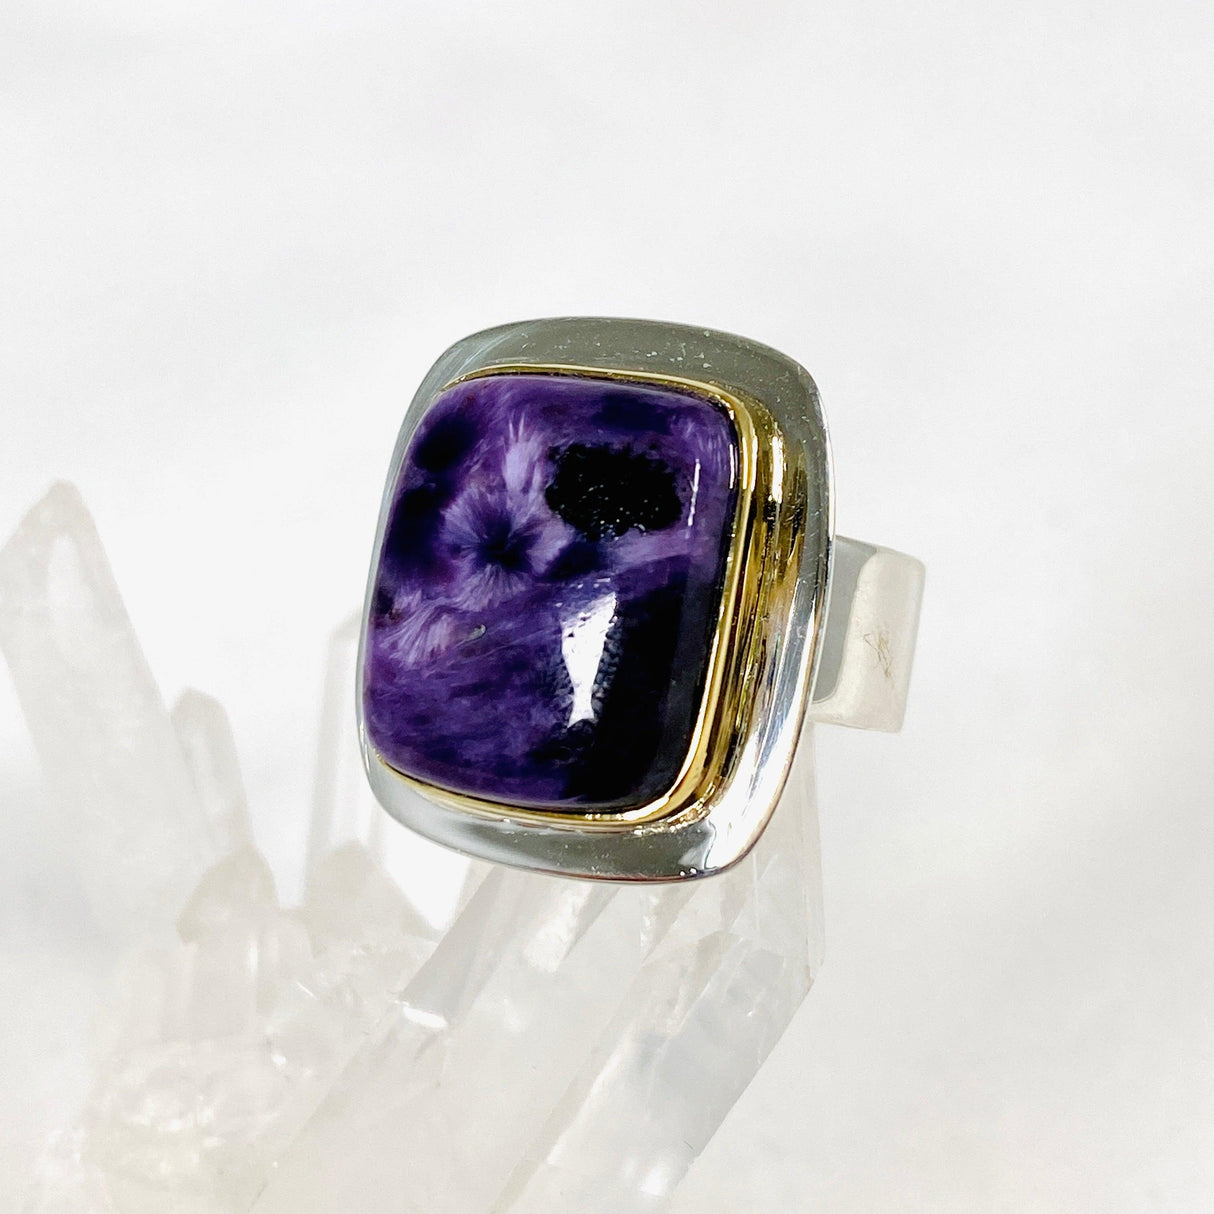 Purple Charoite rectangular ring with brass detailing in sterling silver sitting on a crystal cluster